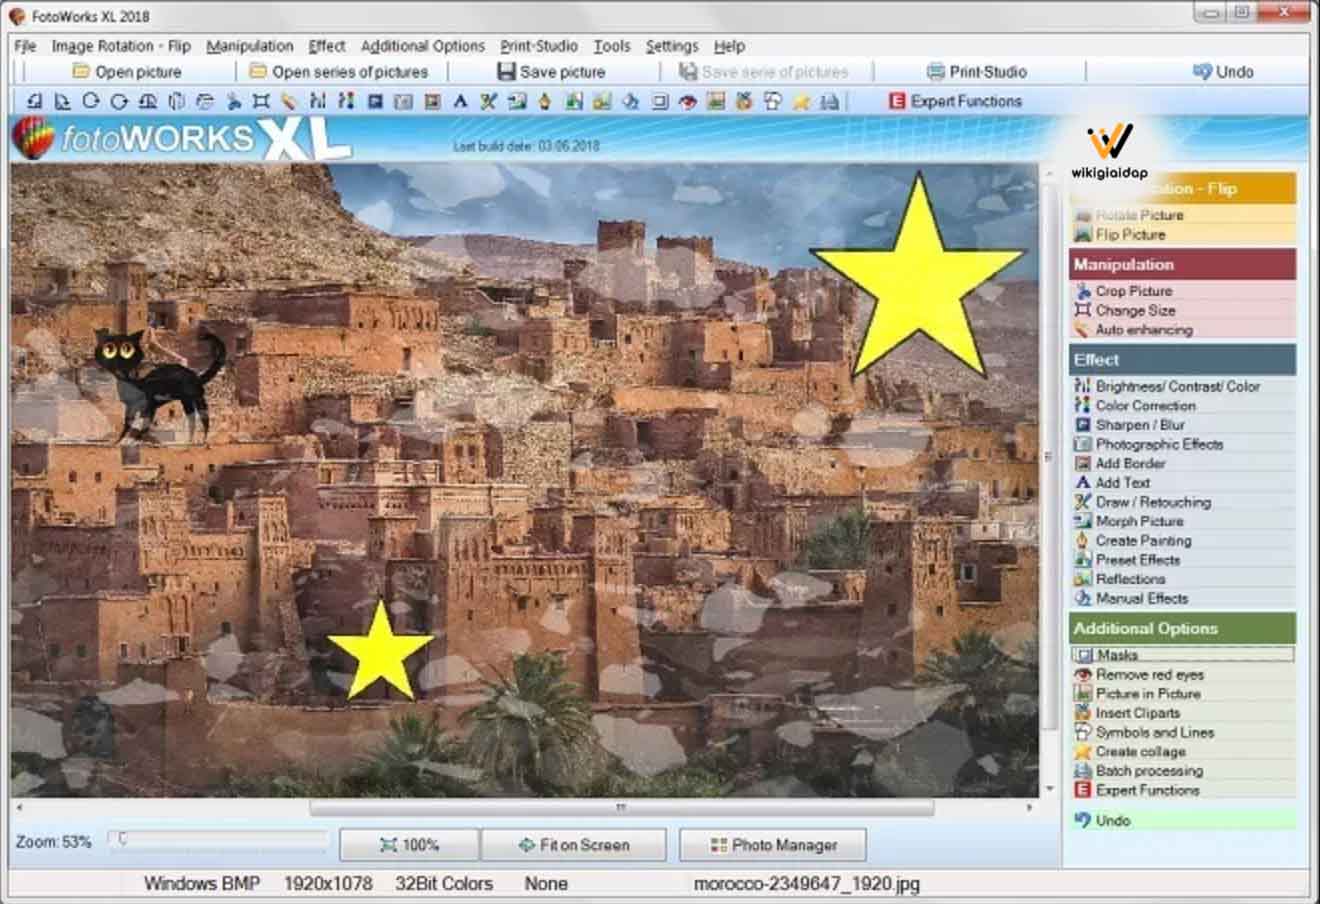 Get the easy photo editing software and test it once but thoroughly